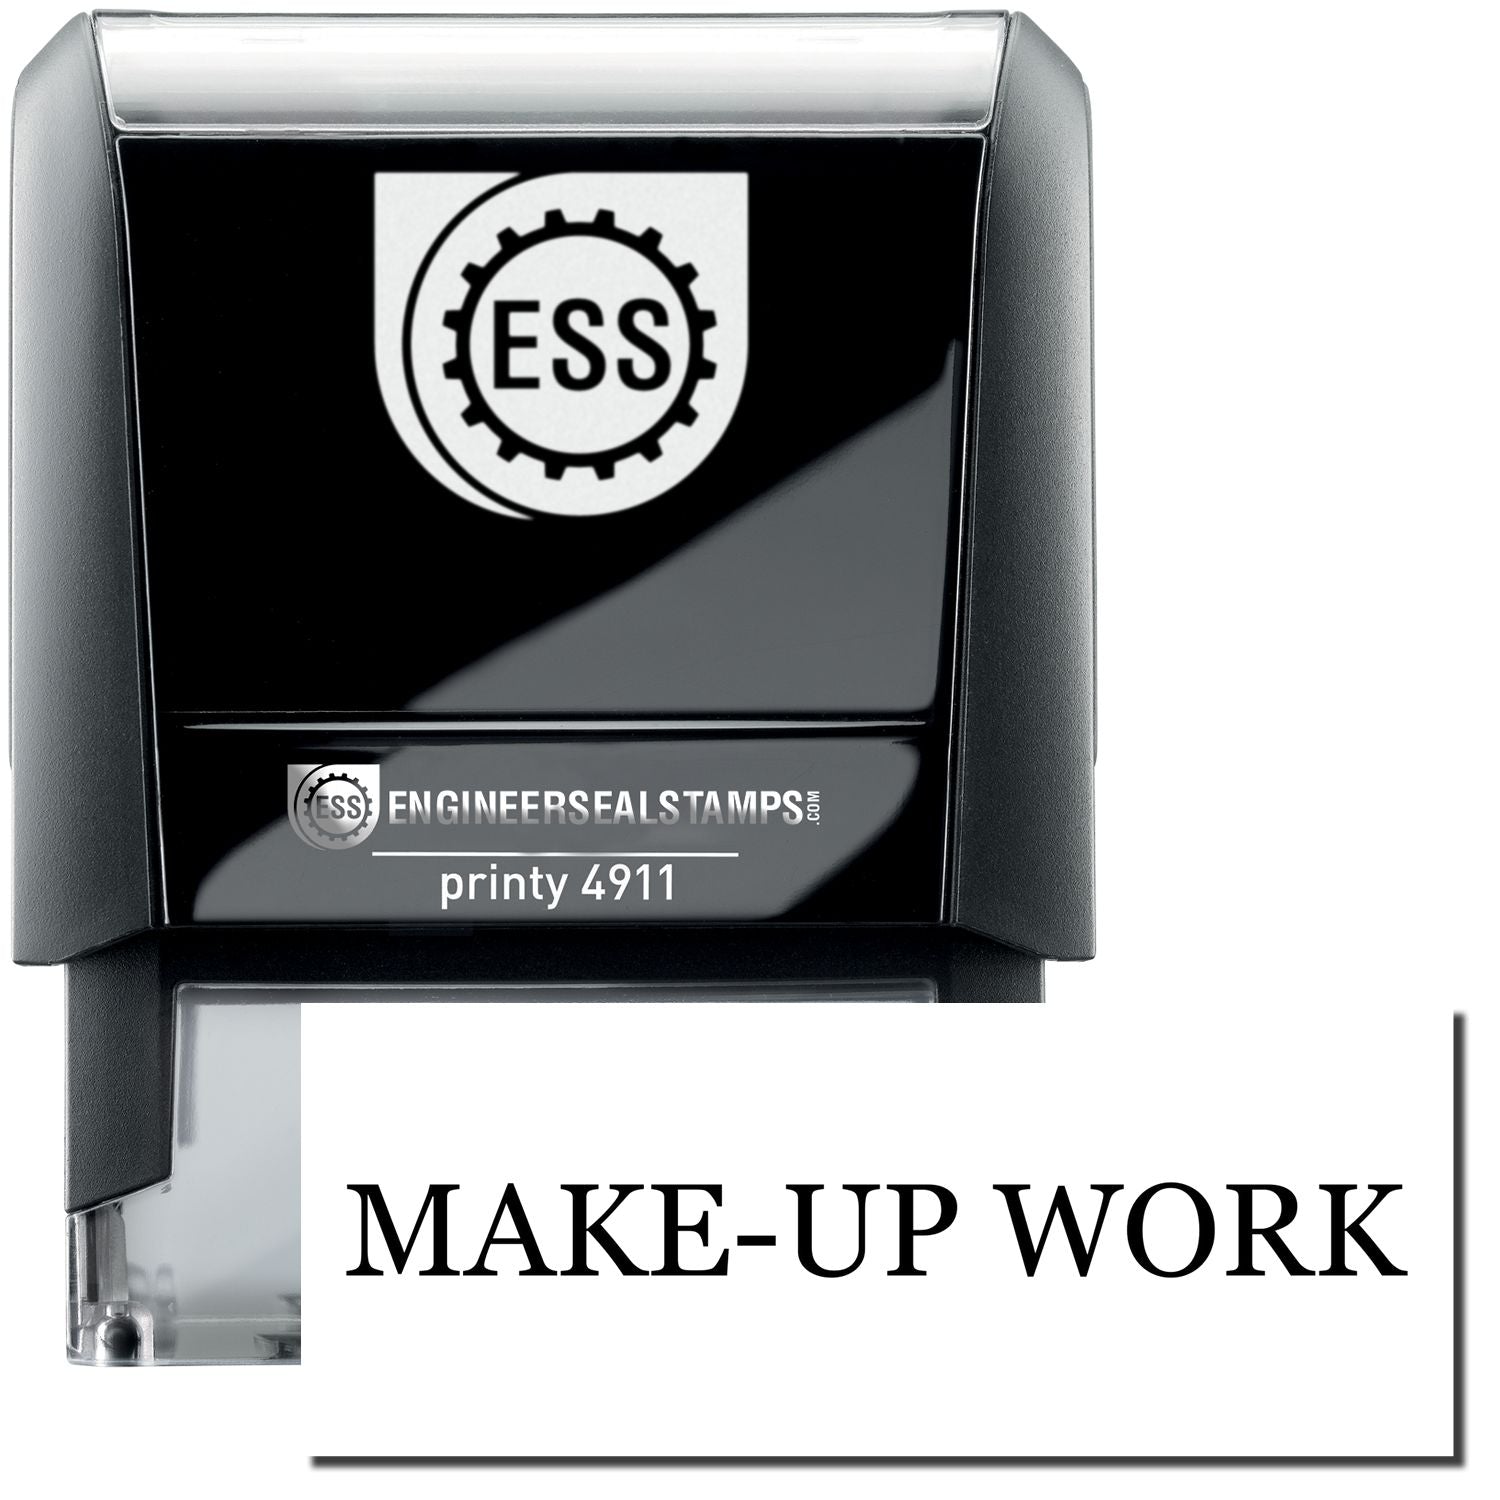 A self-inking stamp with a stamped image showing how the text "MAKE-UP WORK" is displayed after stamping.